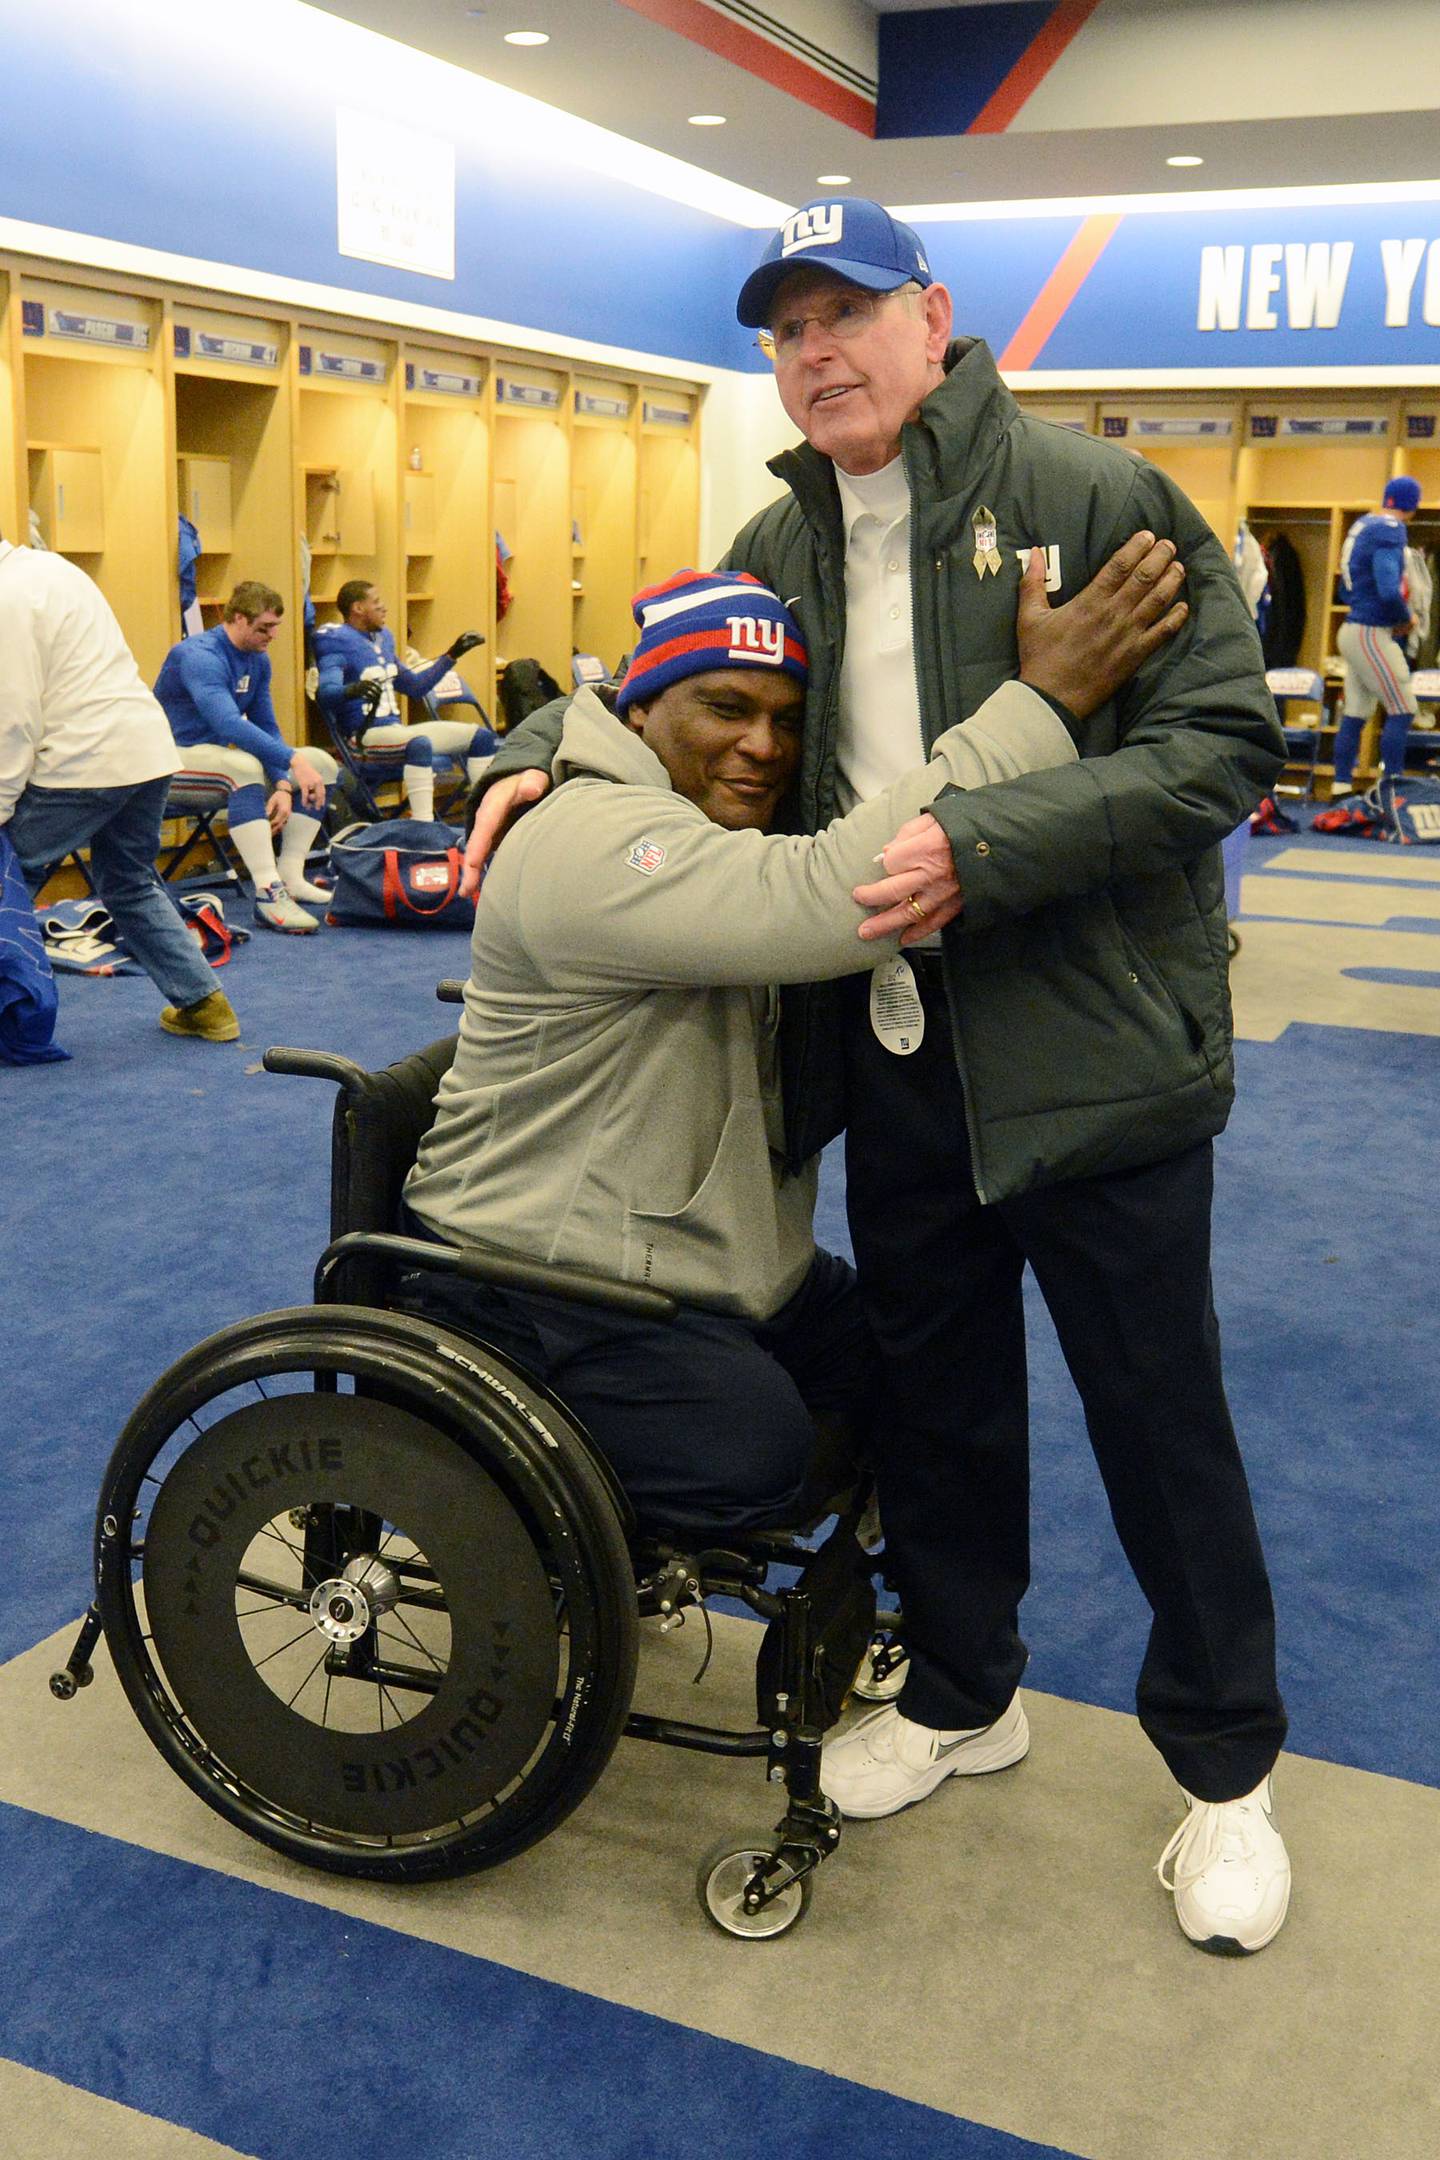 Giants Coach Tom Coughlin and Greg Gadson embrace in the team locker
room following a victory against the Green Bay Packers in November 2012.